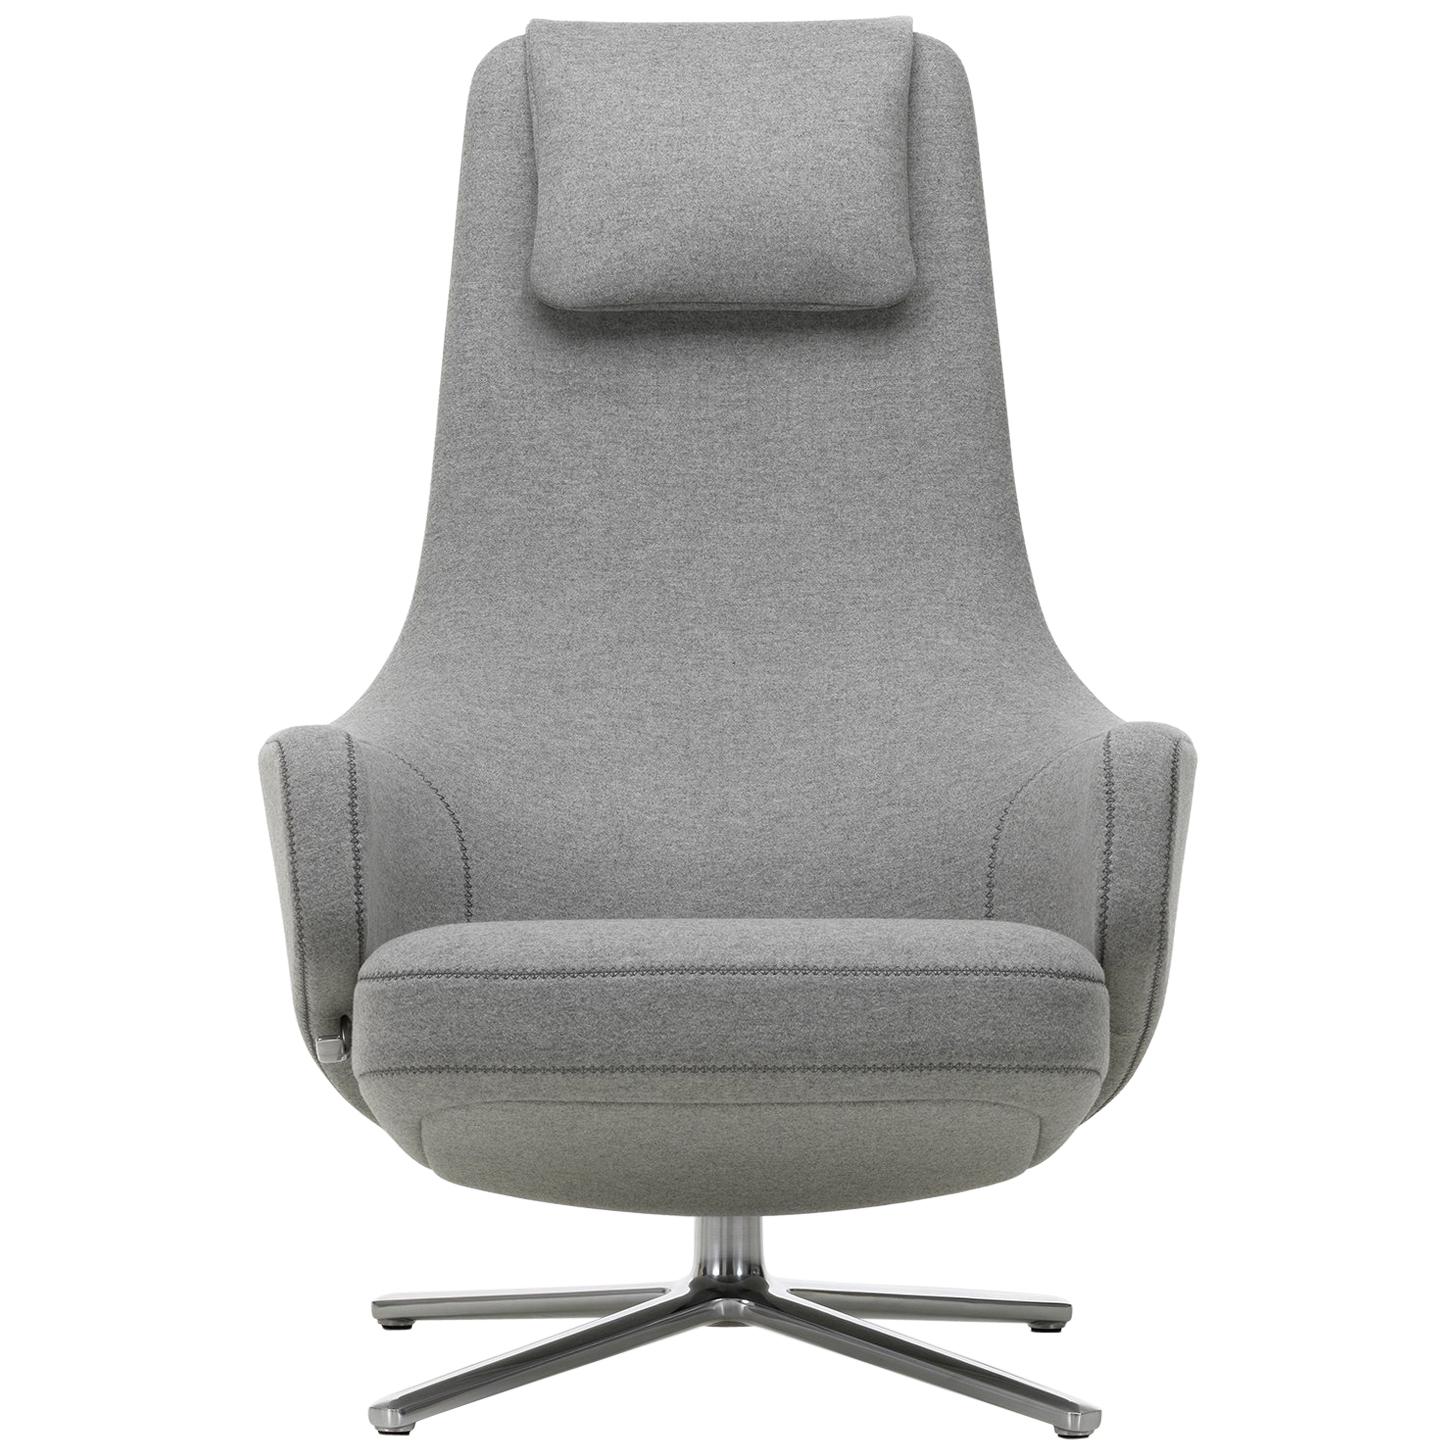 Vitra Repos Lounge Chair in Pebble Grey Cosy by Antonio Citterio For Sale